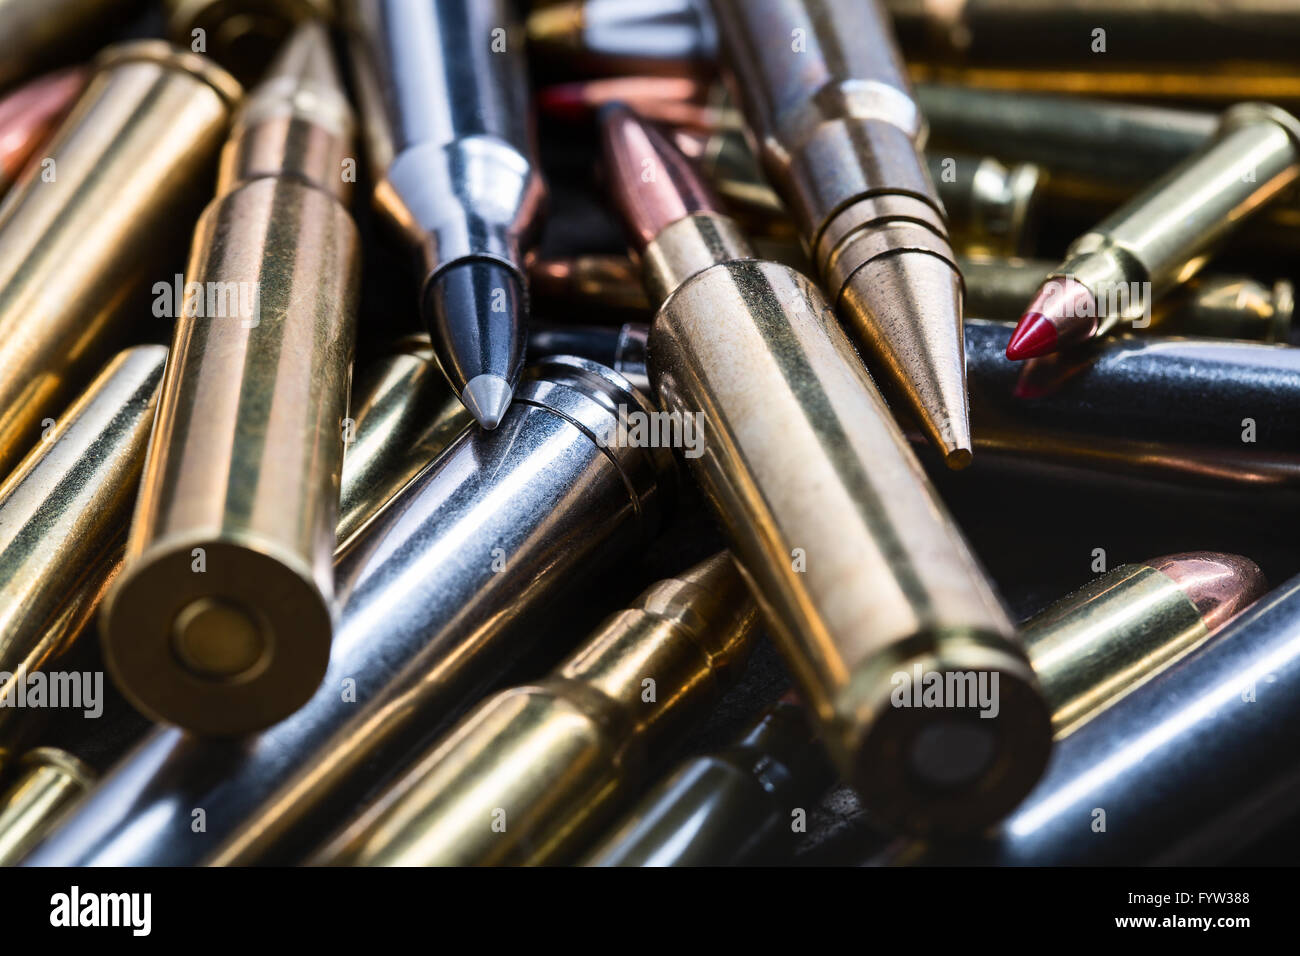 Ammunition for firearms Stock Photo